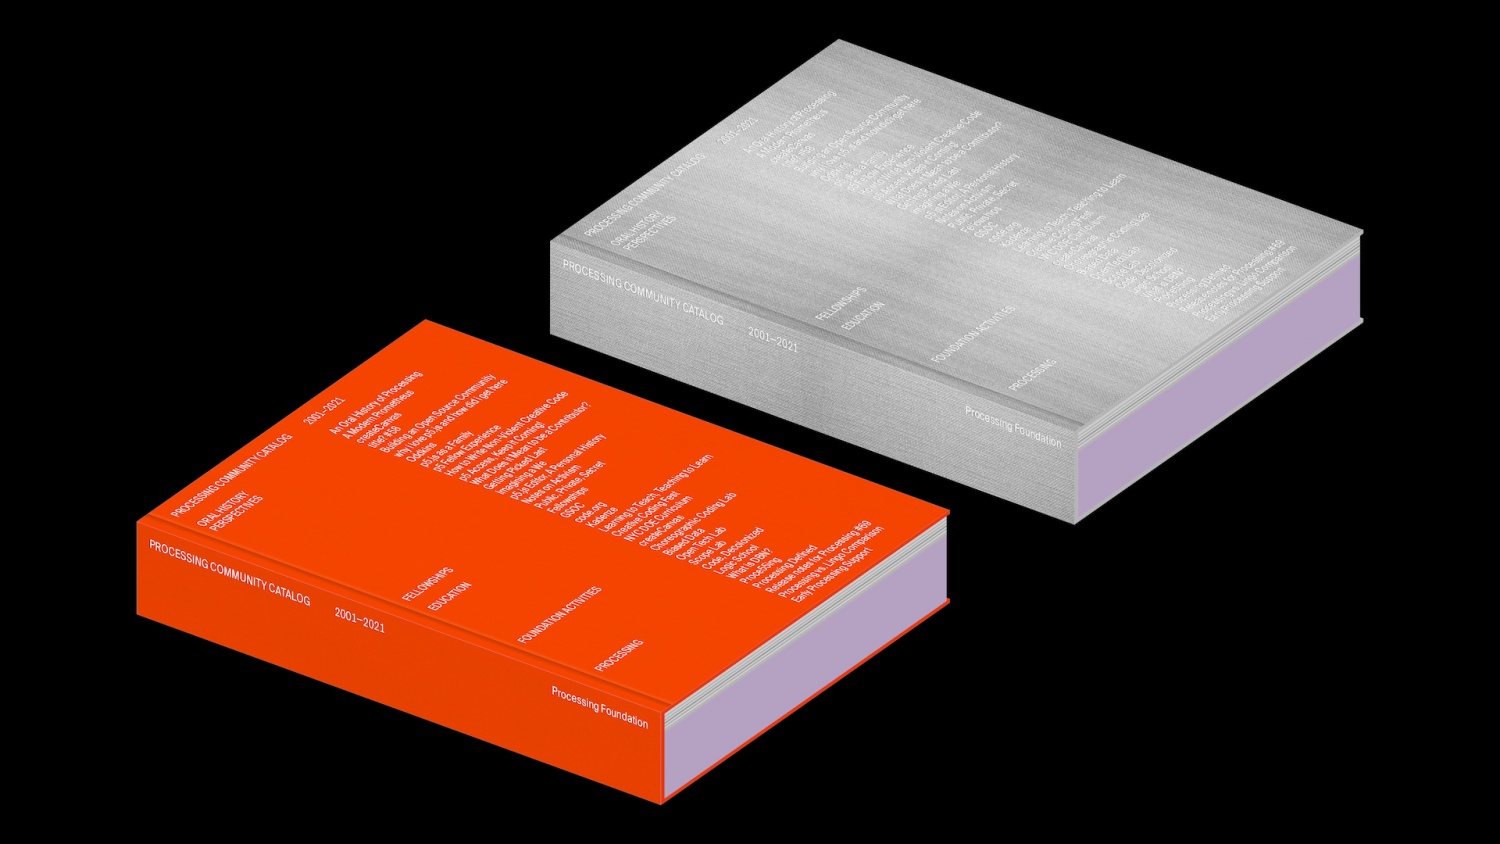 rendering of two books orange and silver covers lavender pages